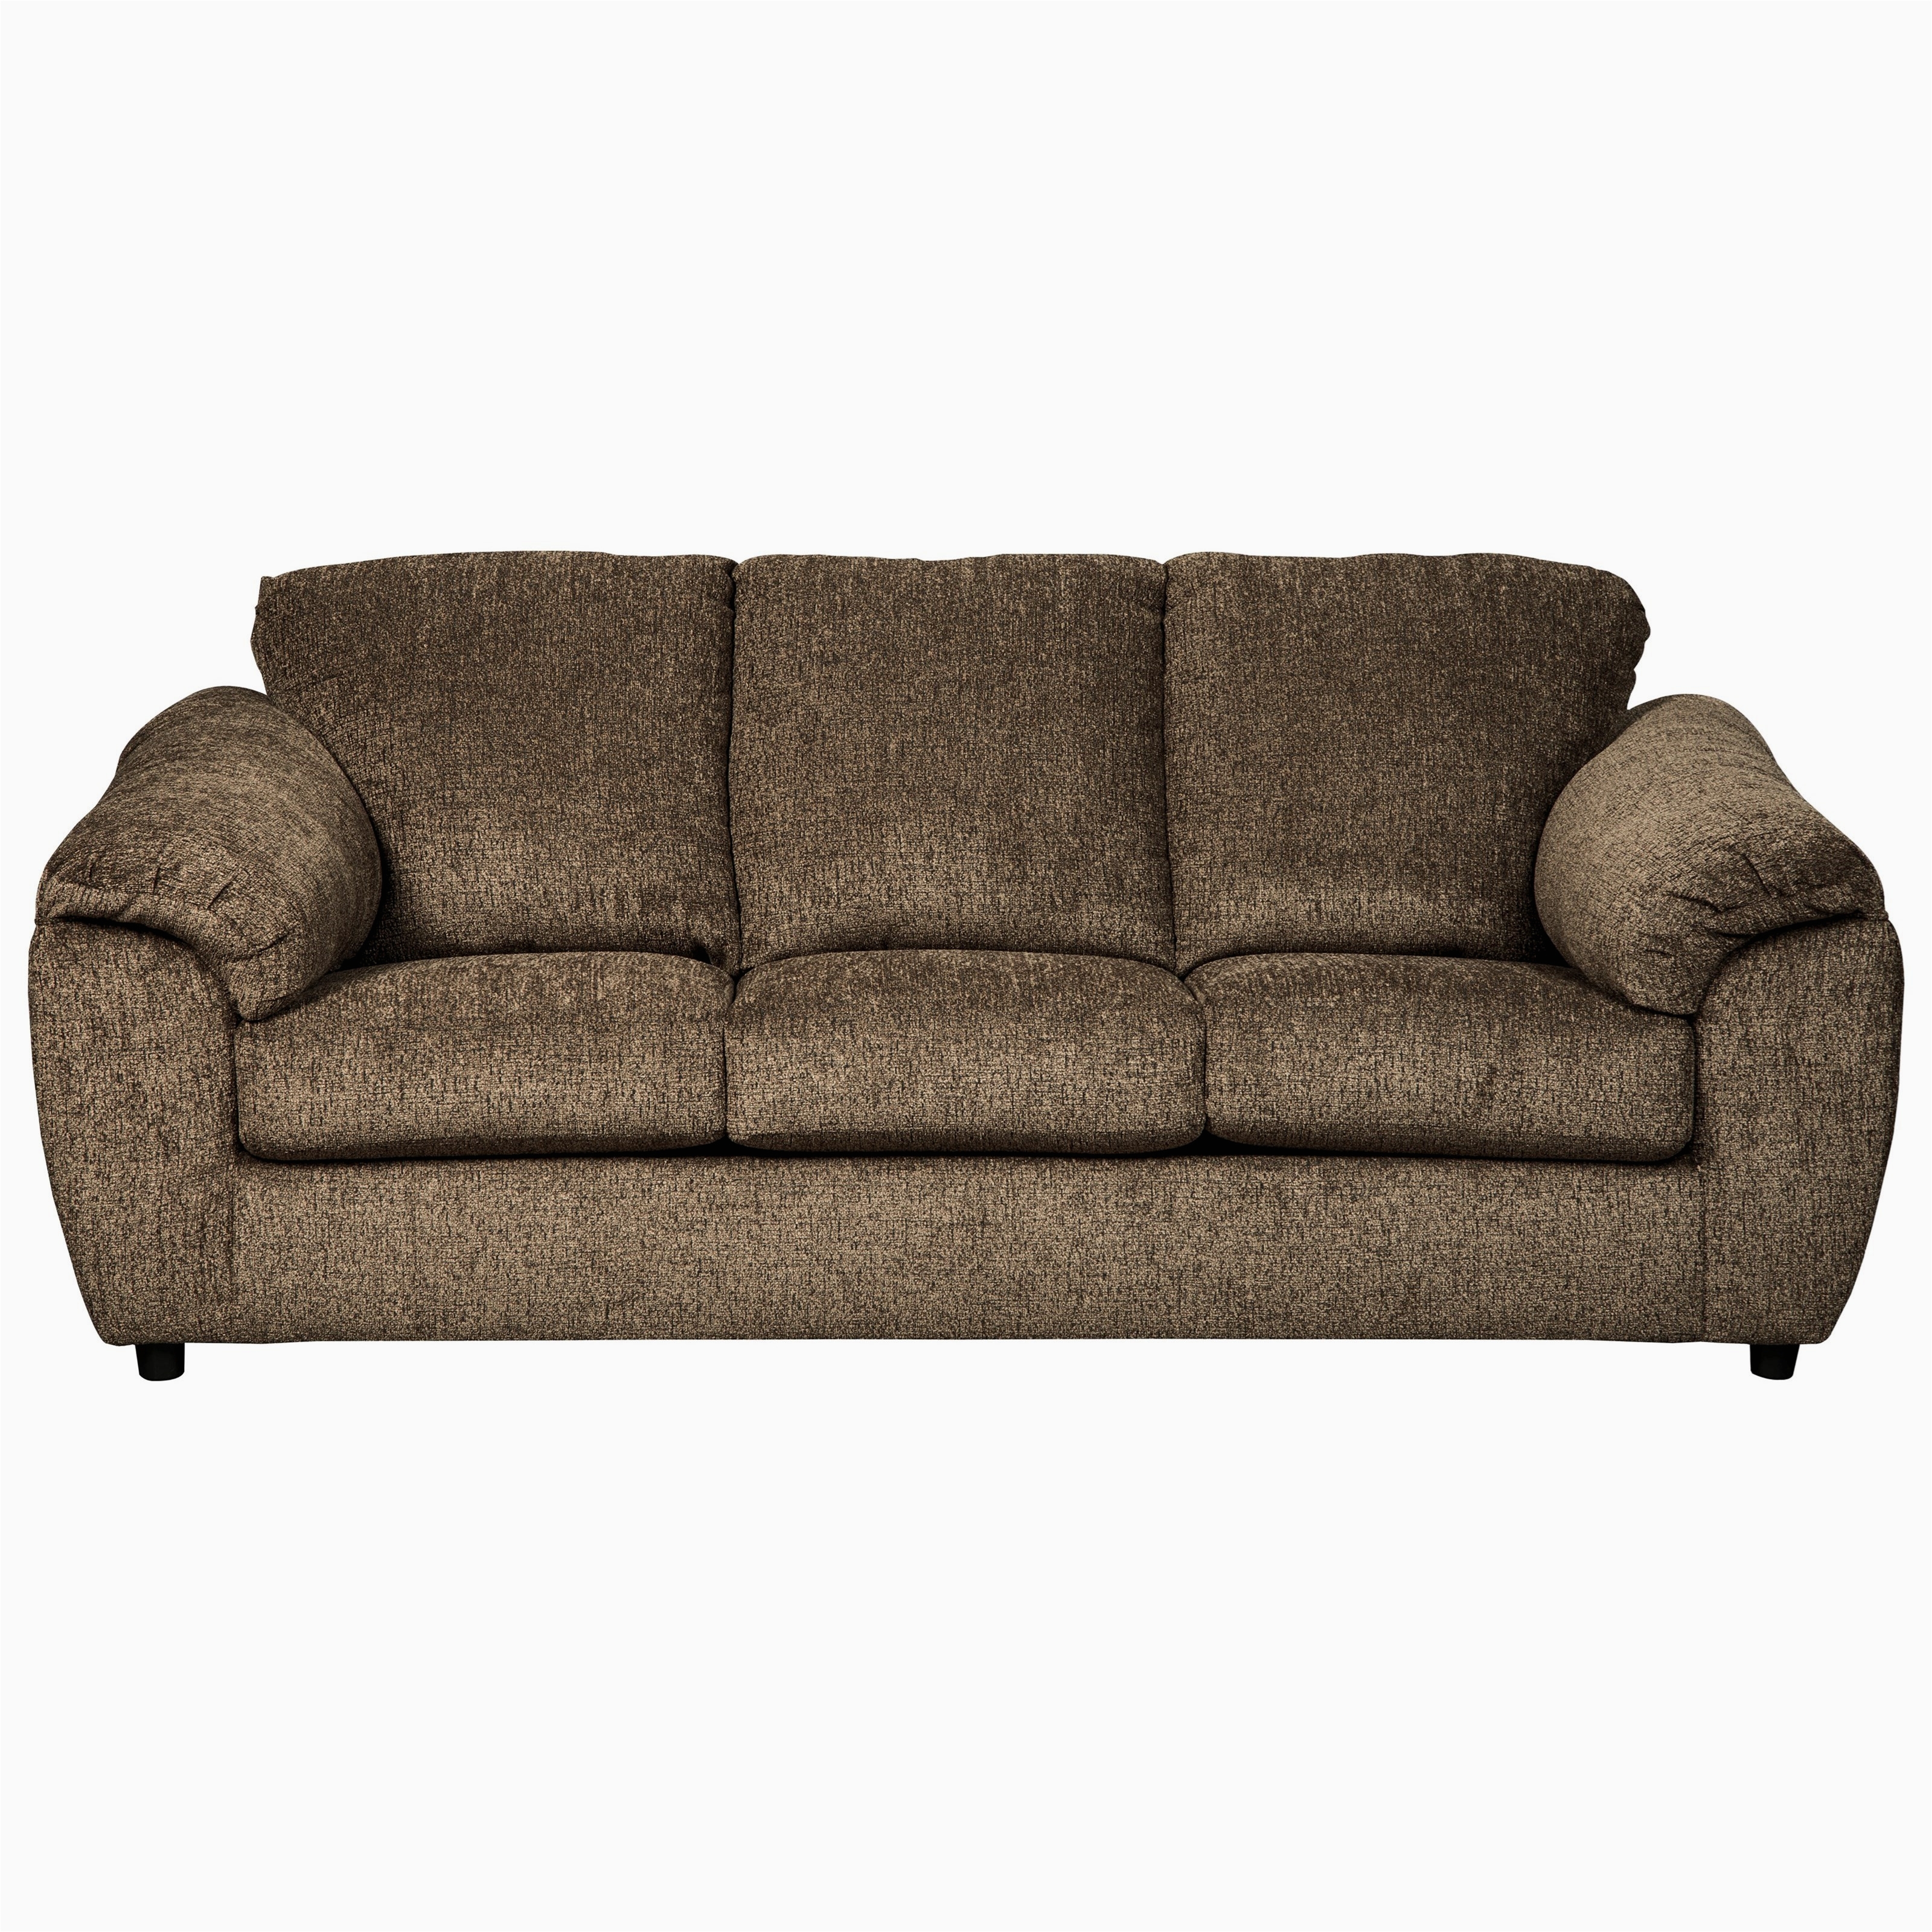 Ashley Furniture Bakersfield ashley Furniture Brown Couch New 25 Cream Leather Sectional Regular